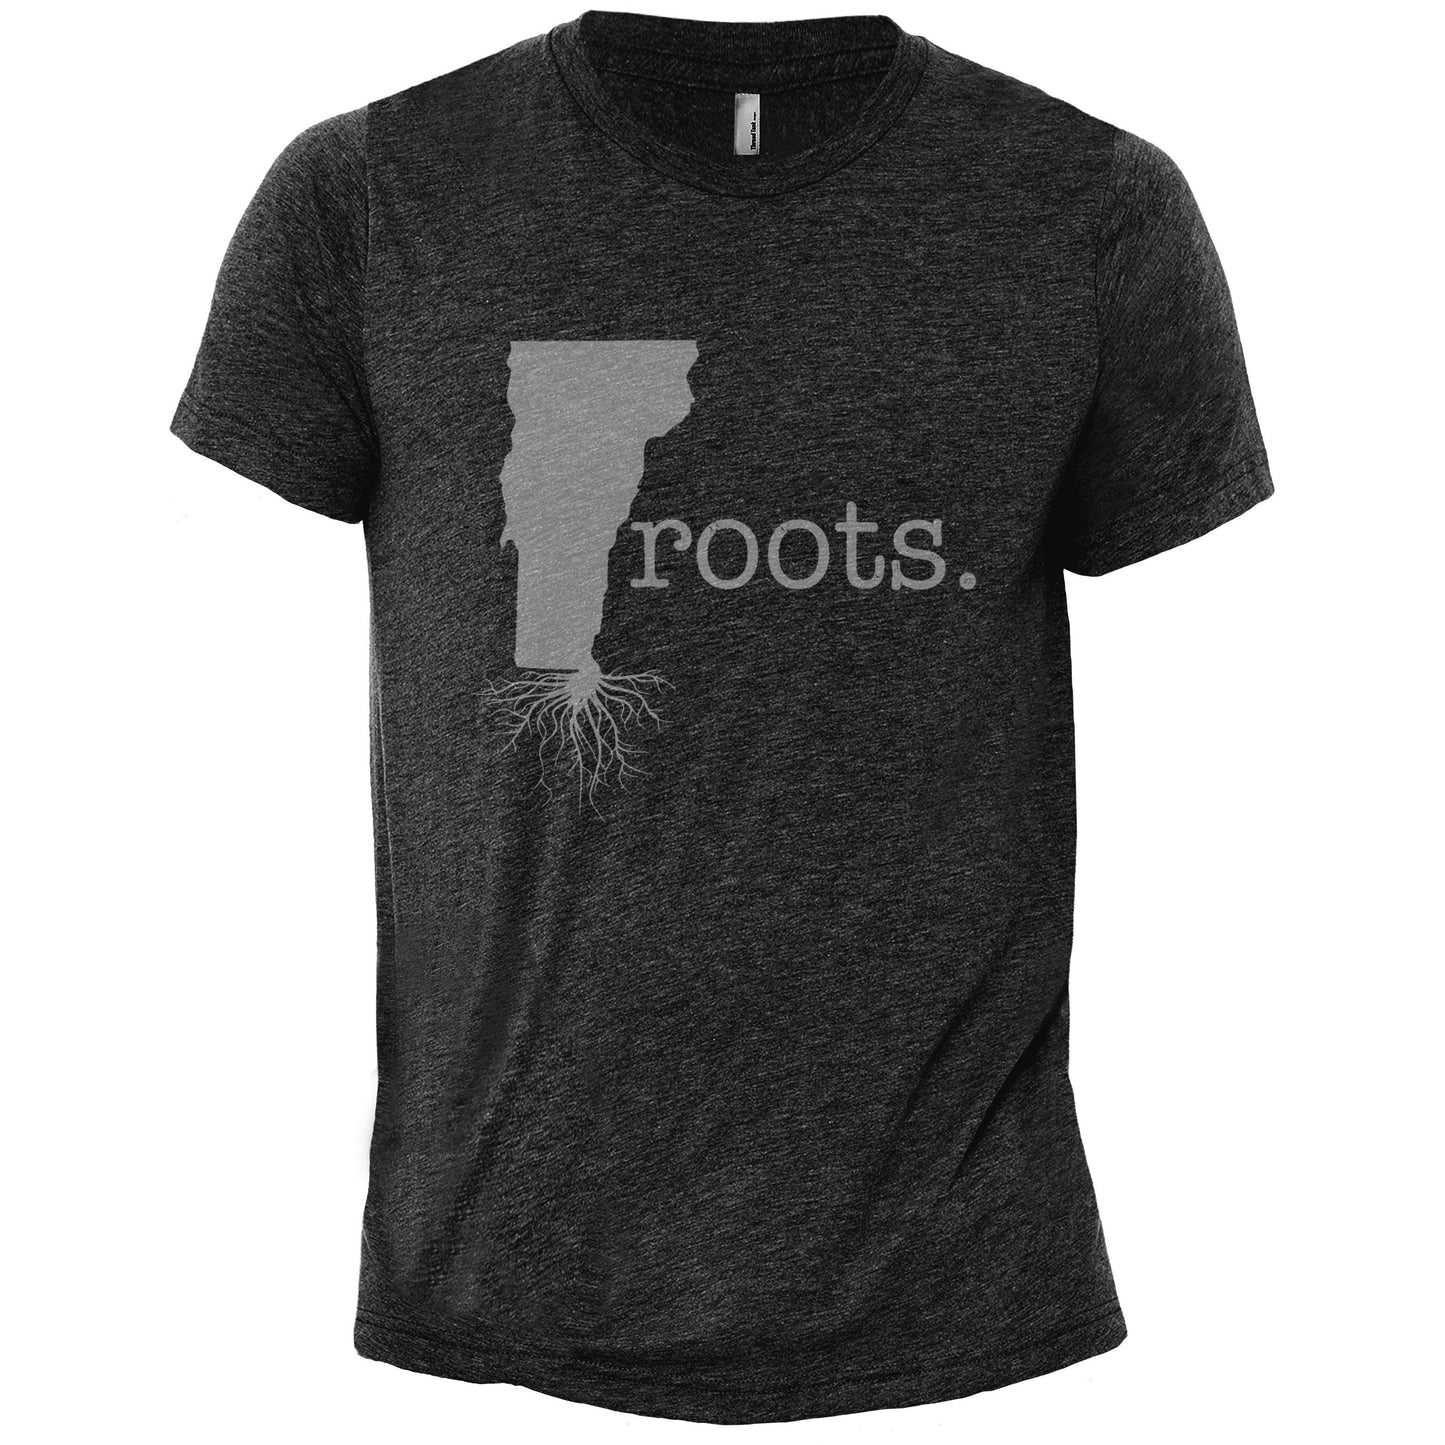 Roots Vermont VT - Stories You Can Wear